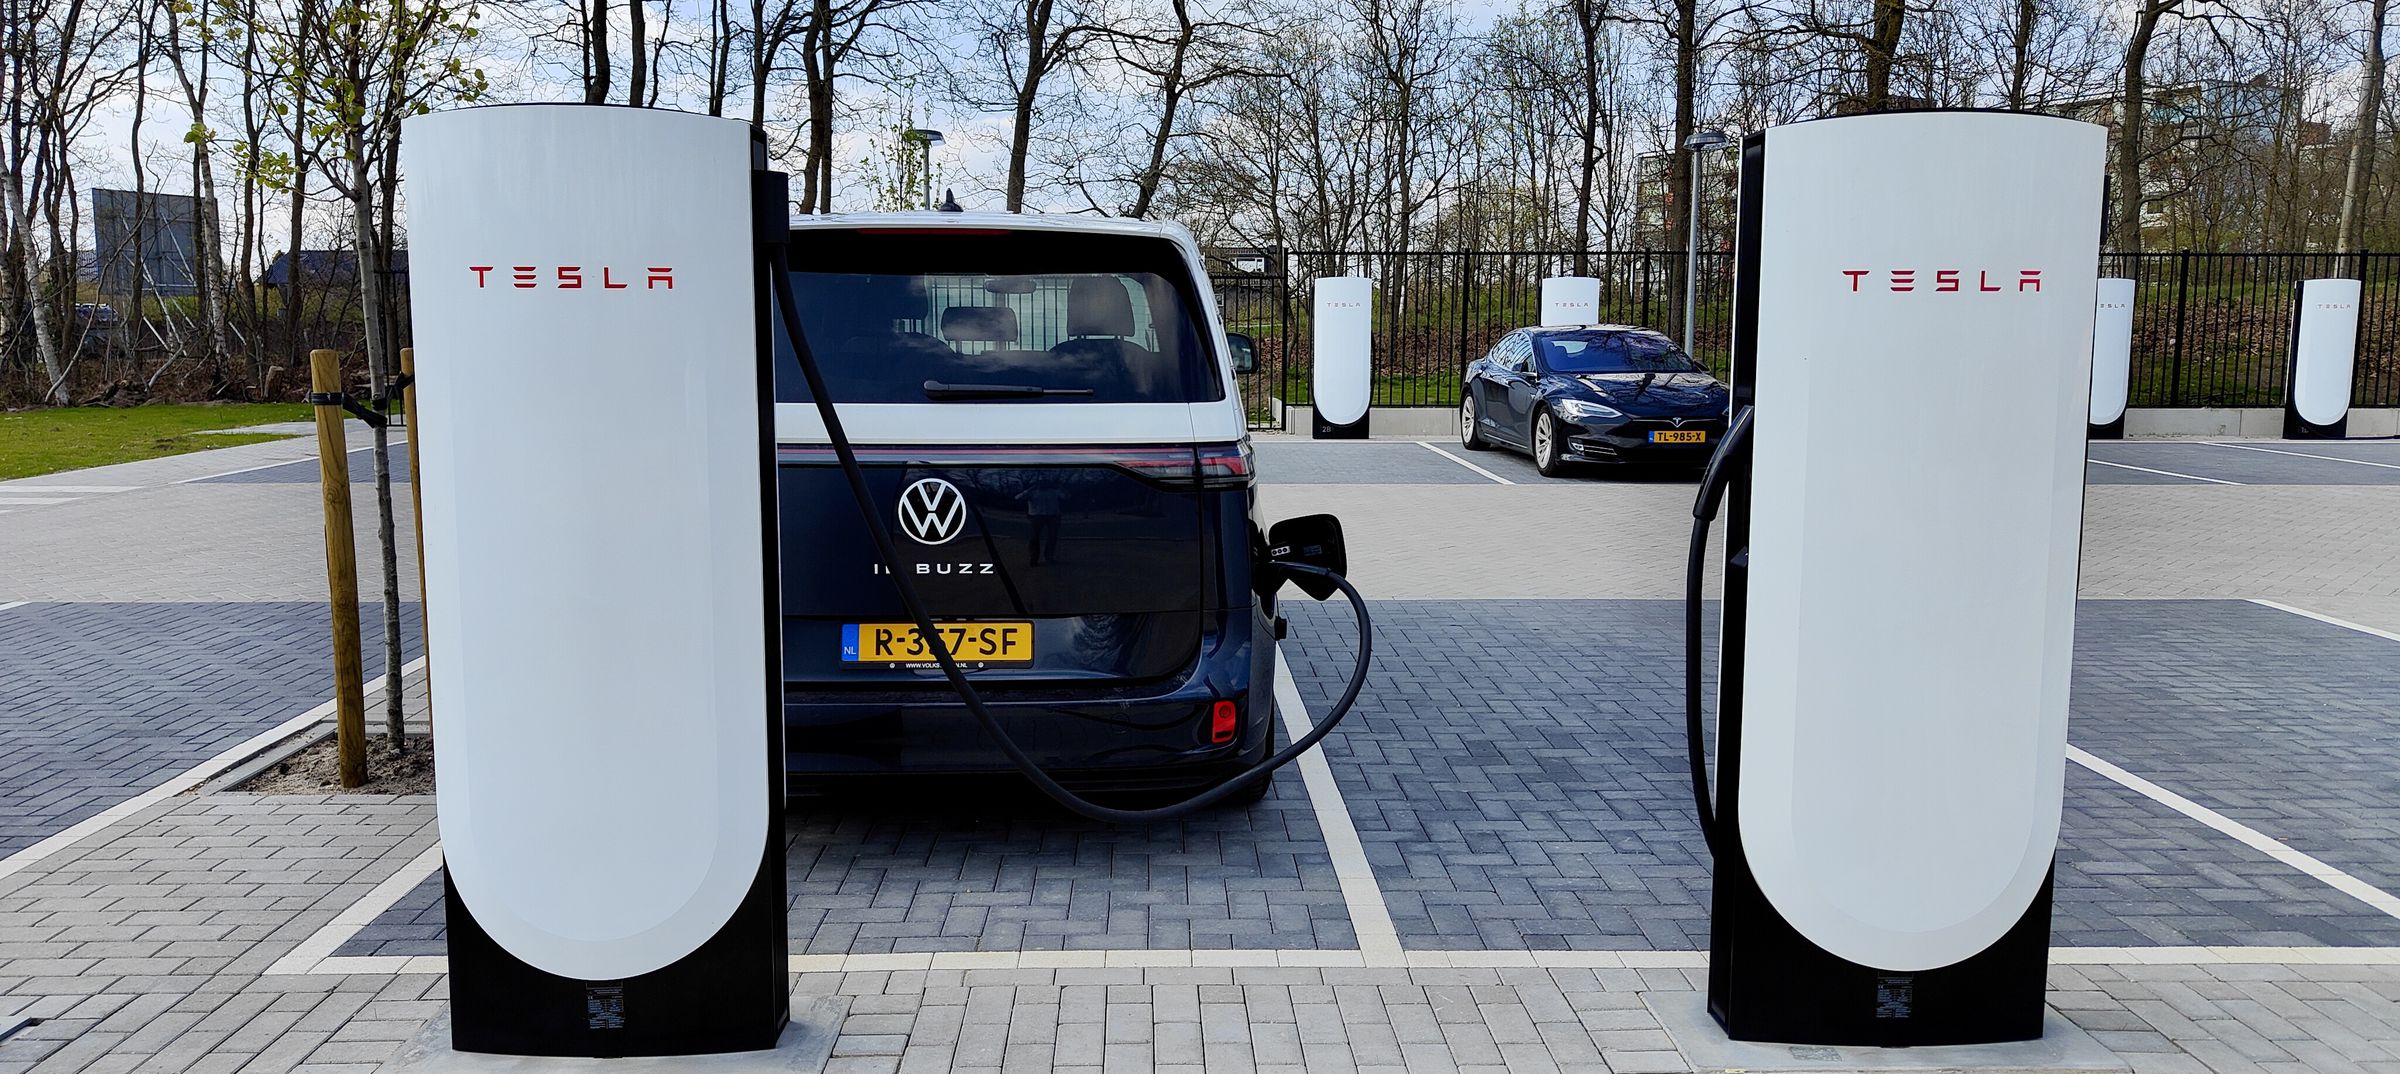 <em>Yes, Tesla’s Superchargers are generally open to all comers in Europe, no adapter needed.</em>